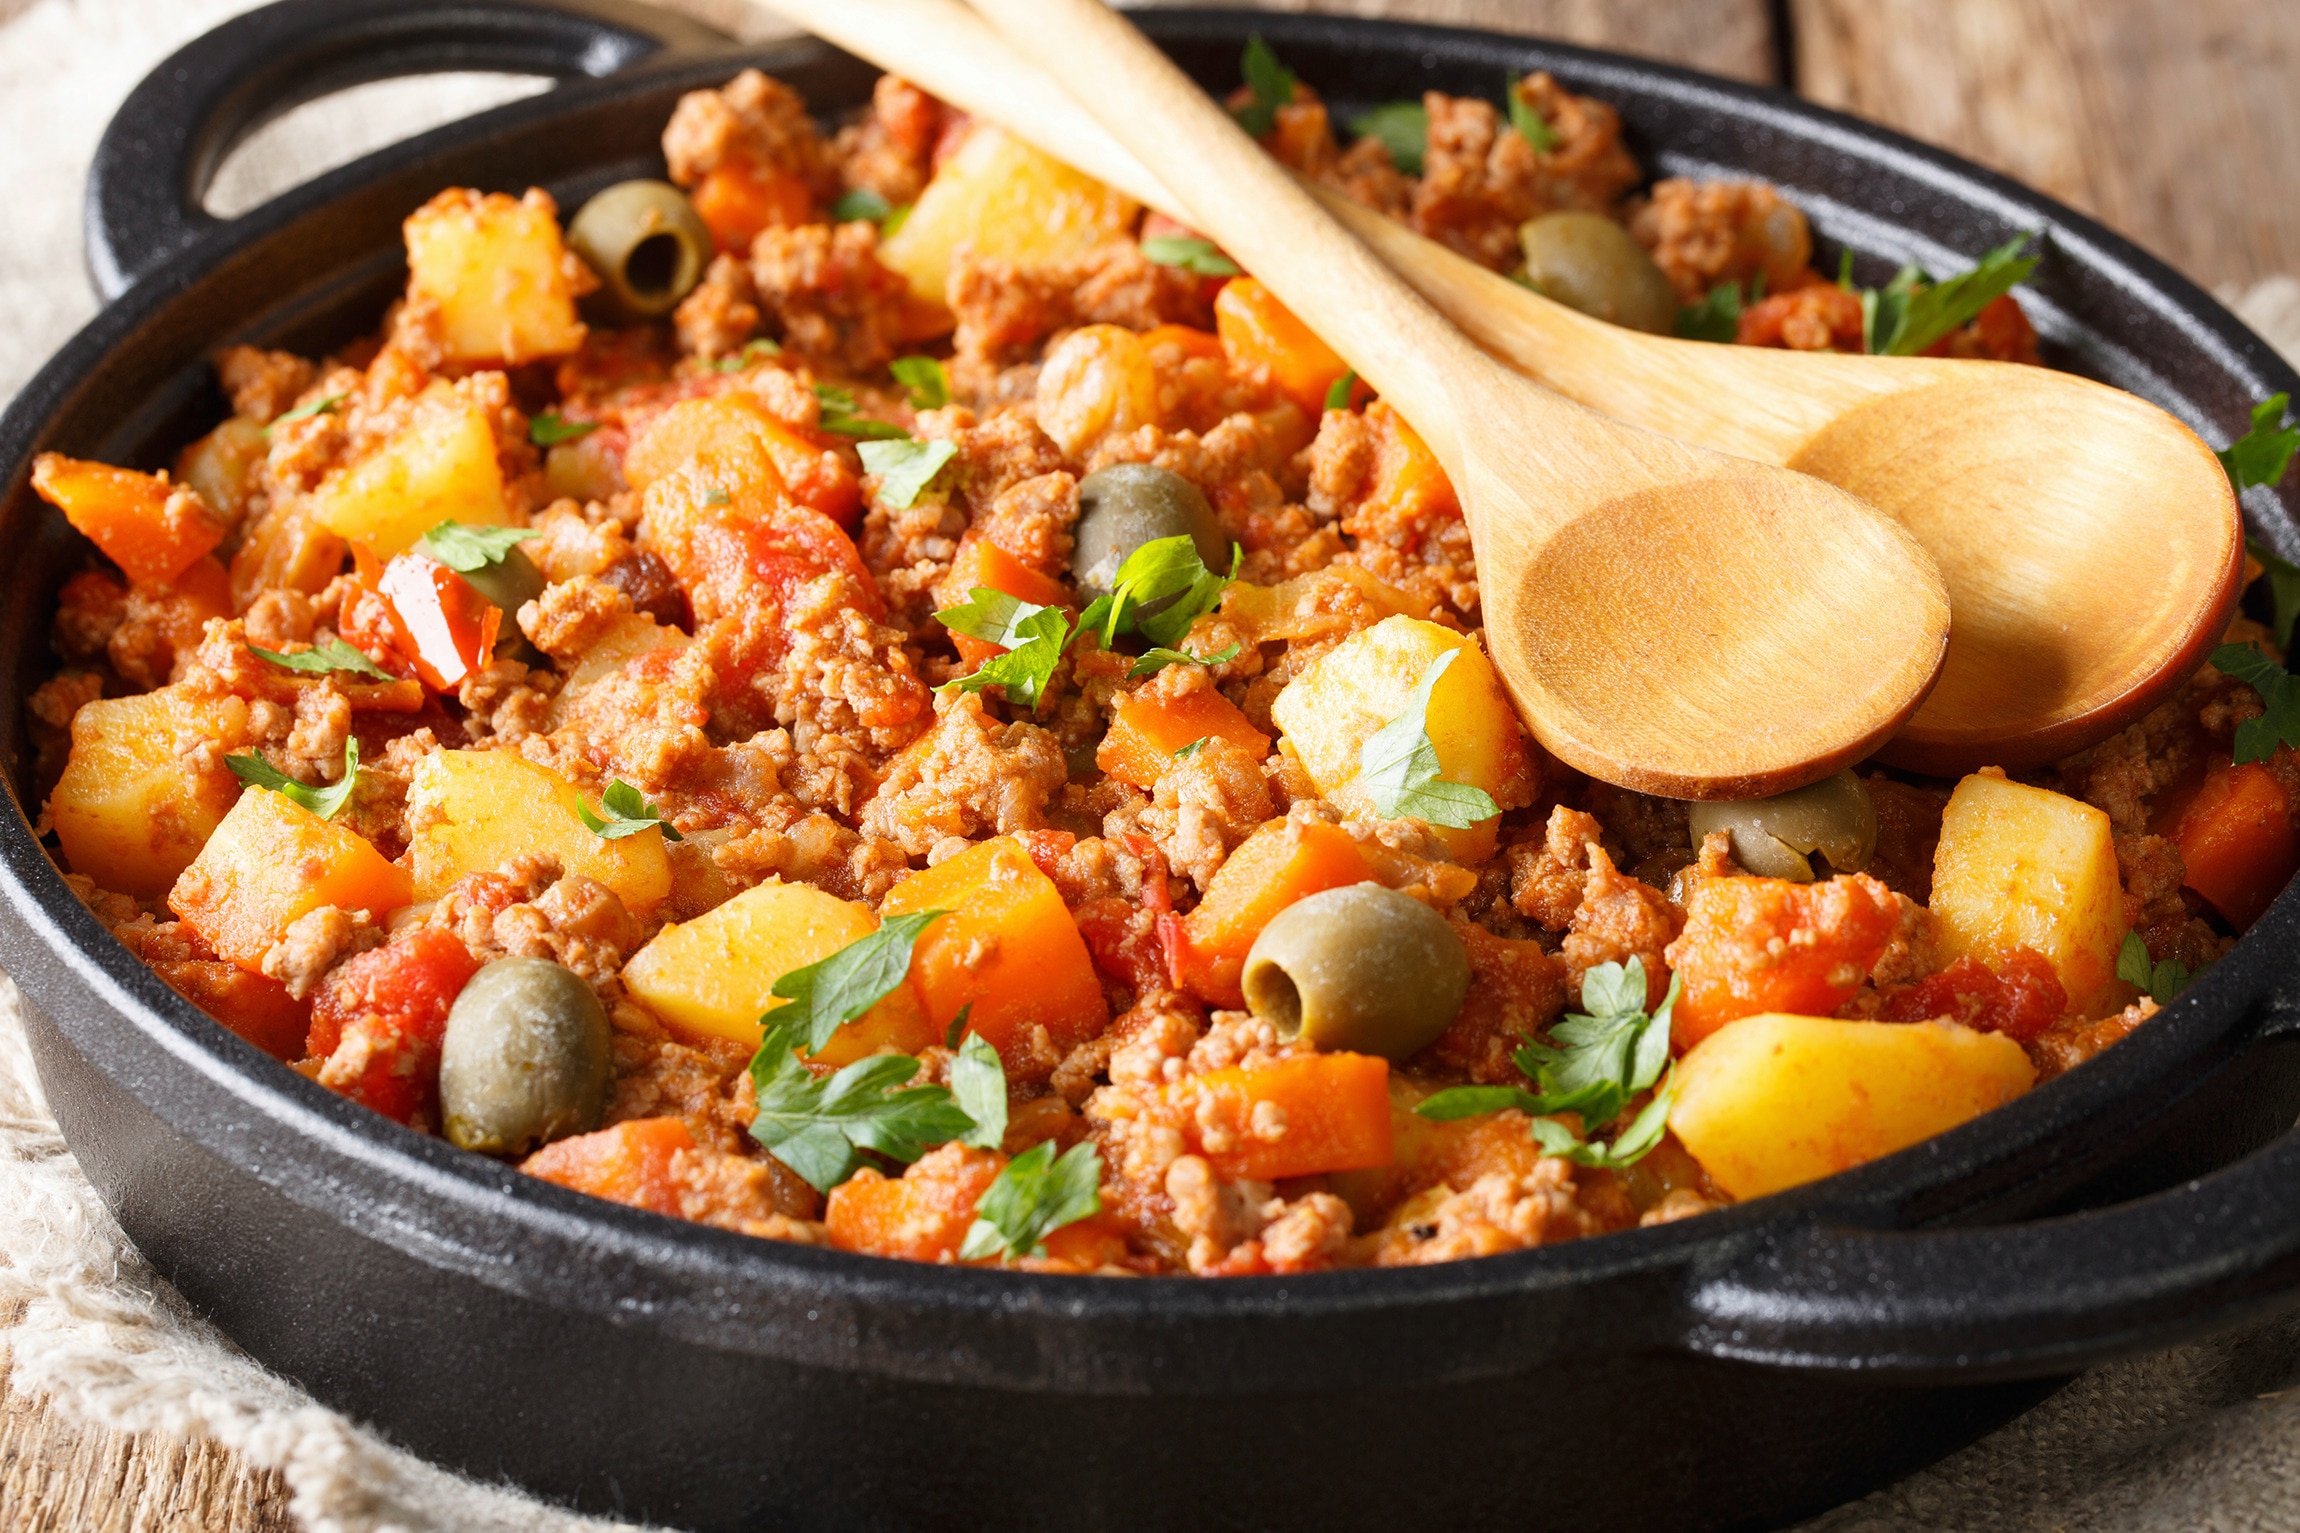 A skillet of picadillo with olives, carrots, potatoes, and bell peppers